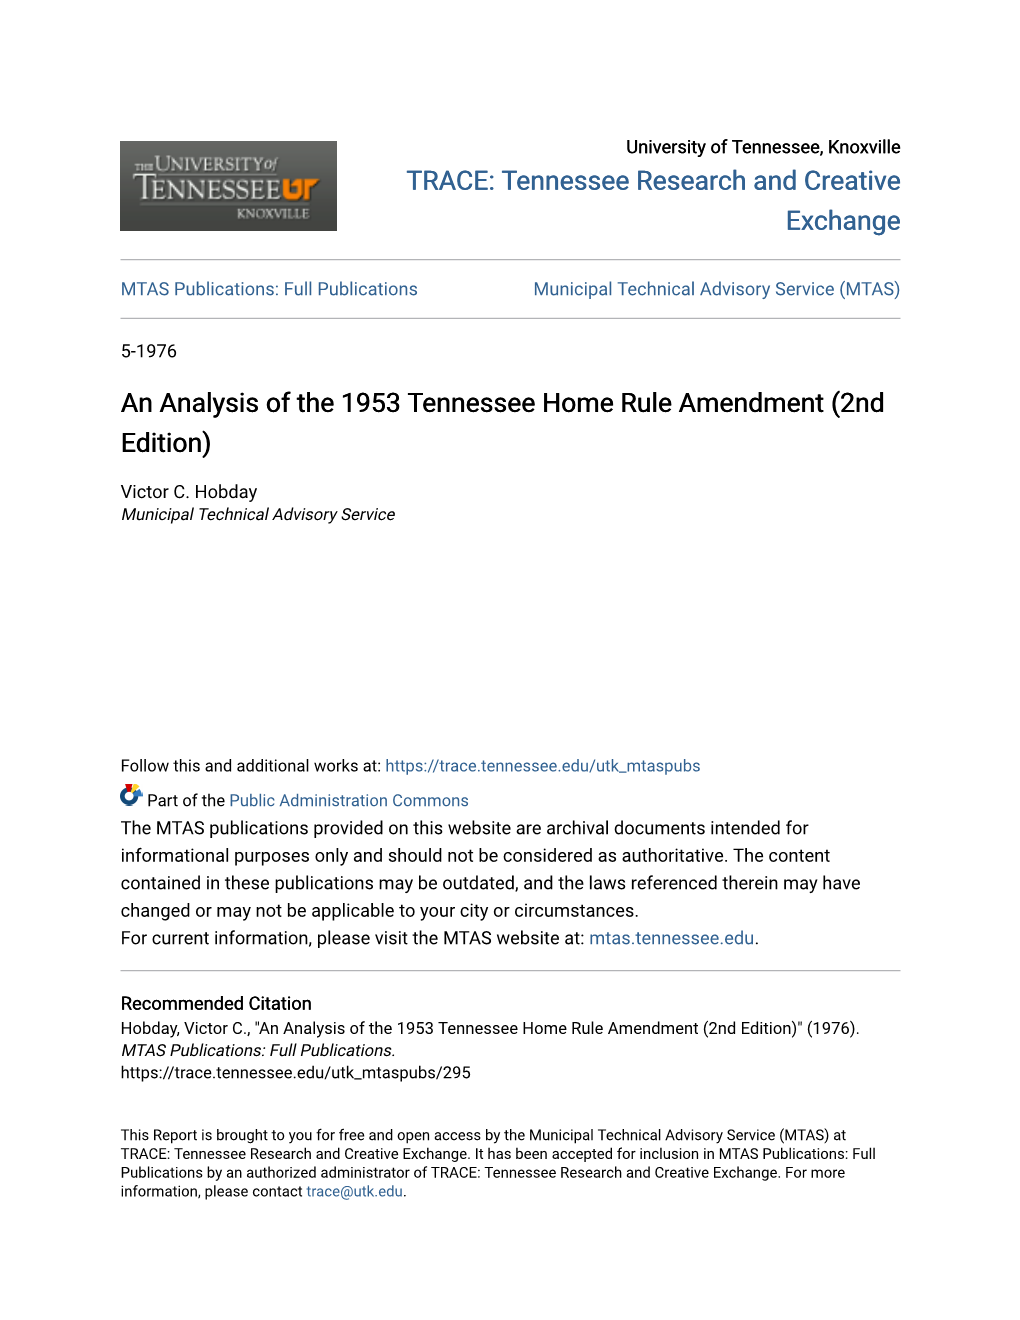 An Analysis of the 1953 Tennessee Home Rule Amendment (2Nd Edition)